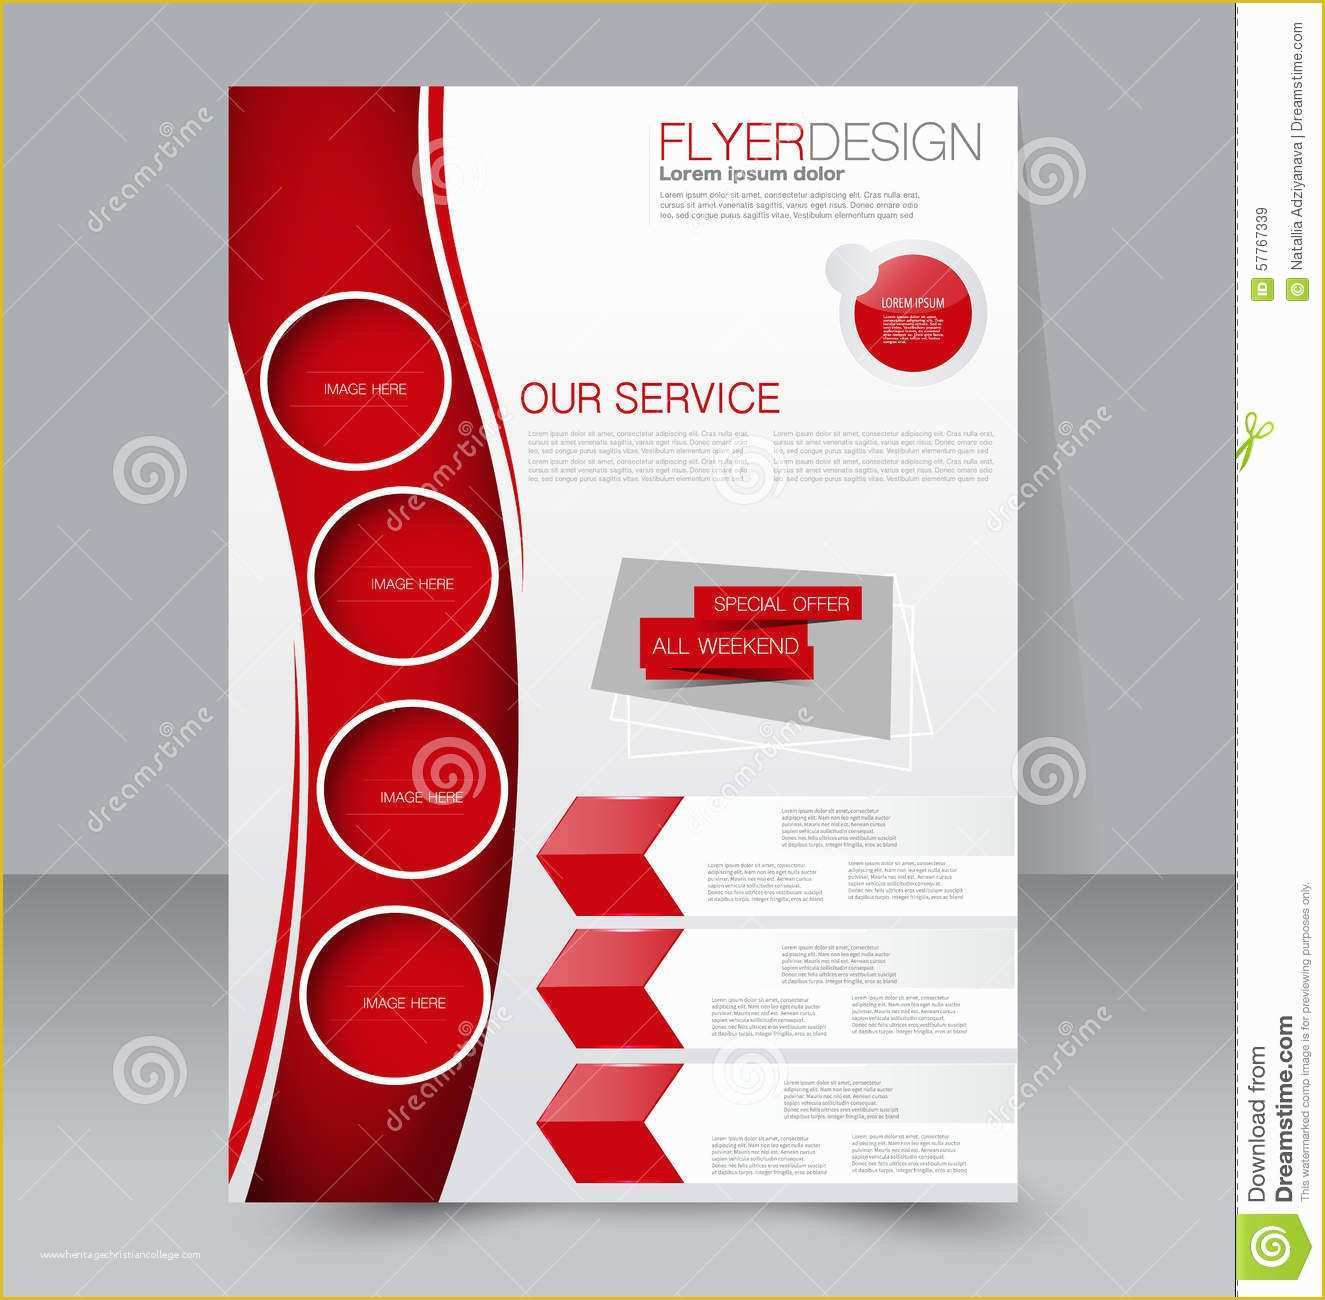 Free Business Flyer Templates for Word Of Stock Flyer Templates Yourweek D81b0ceca25e